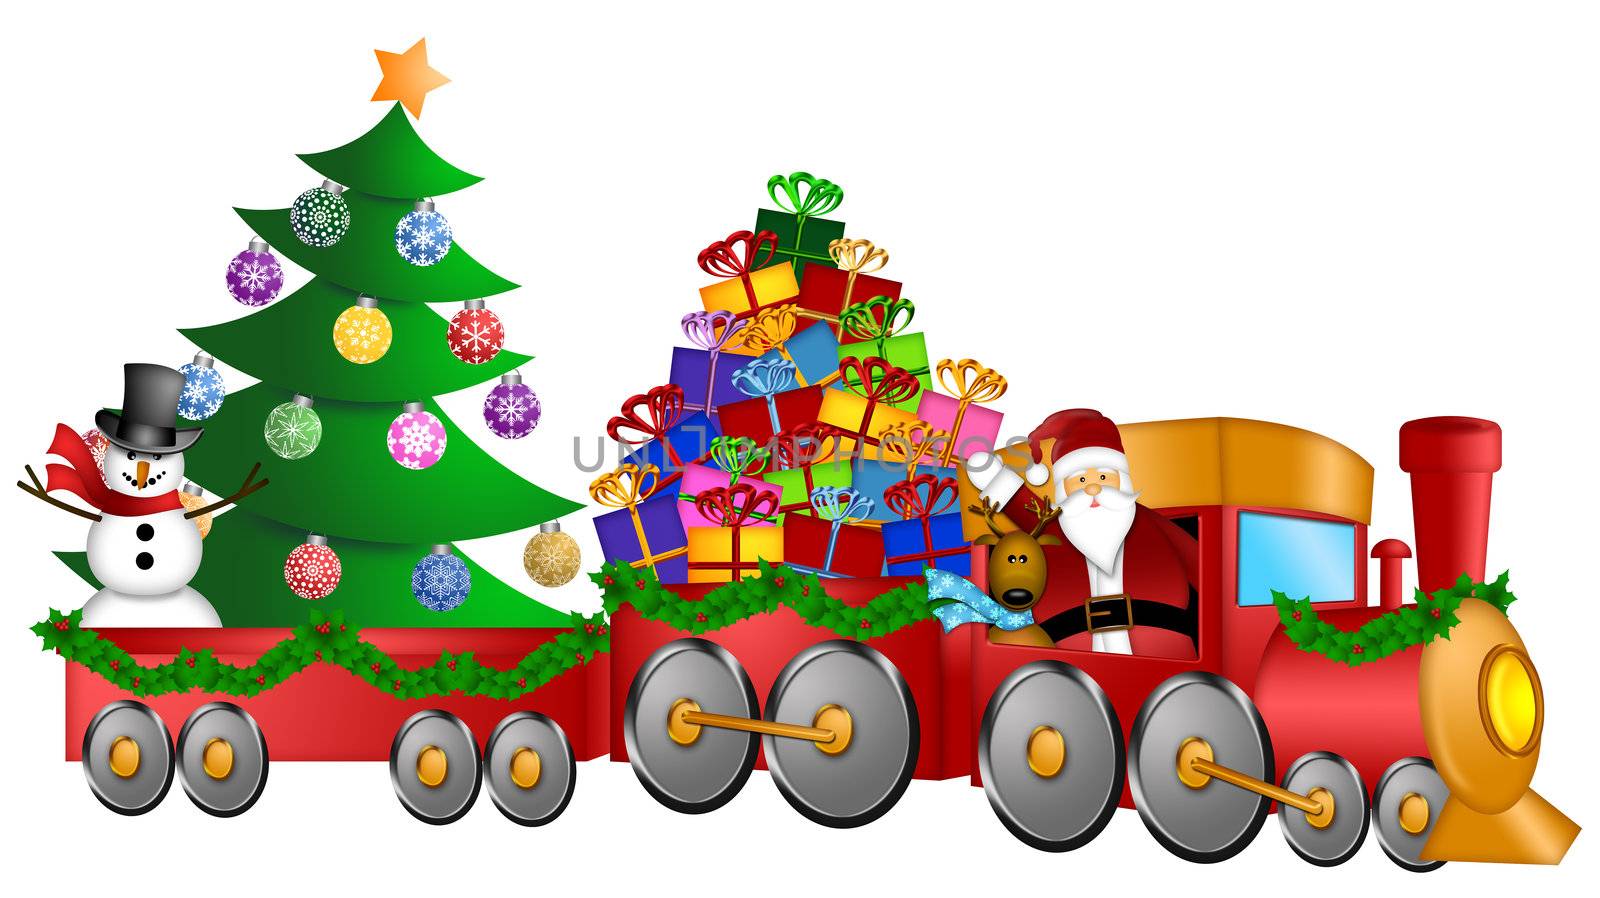 Santa Claus and Reindeer Delivering Gifts in Red Train with Snowman and Christmas Tree Illustration